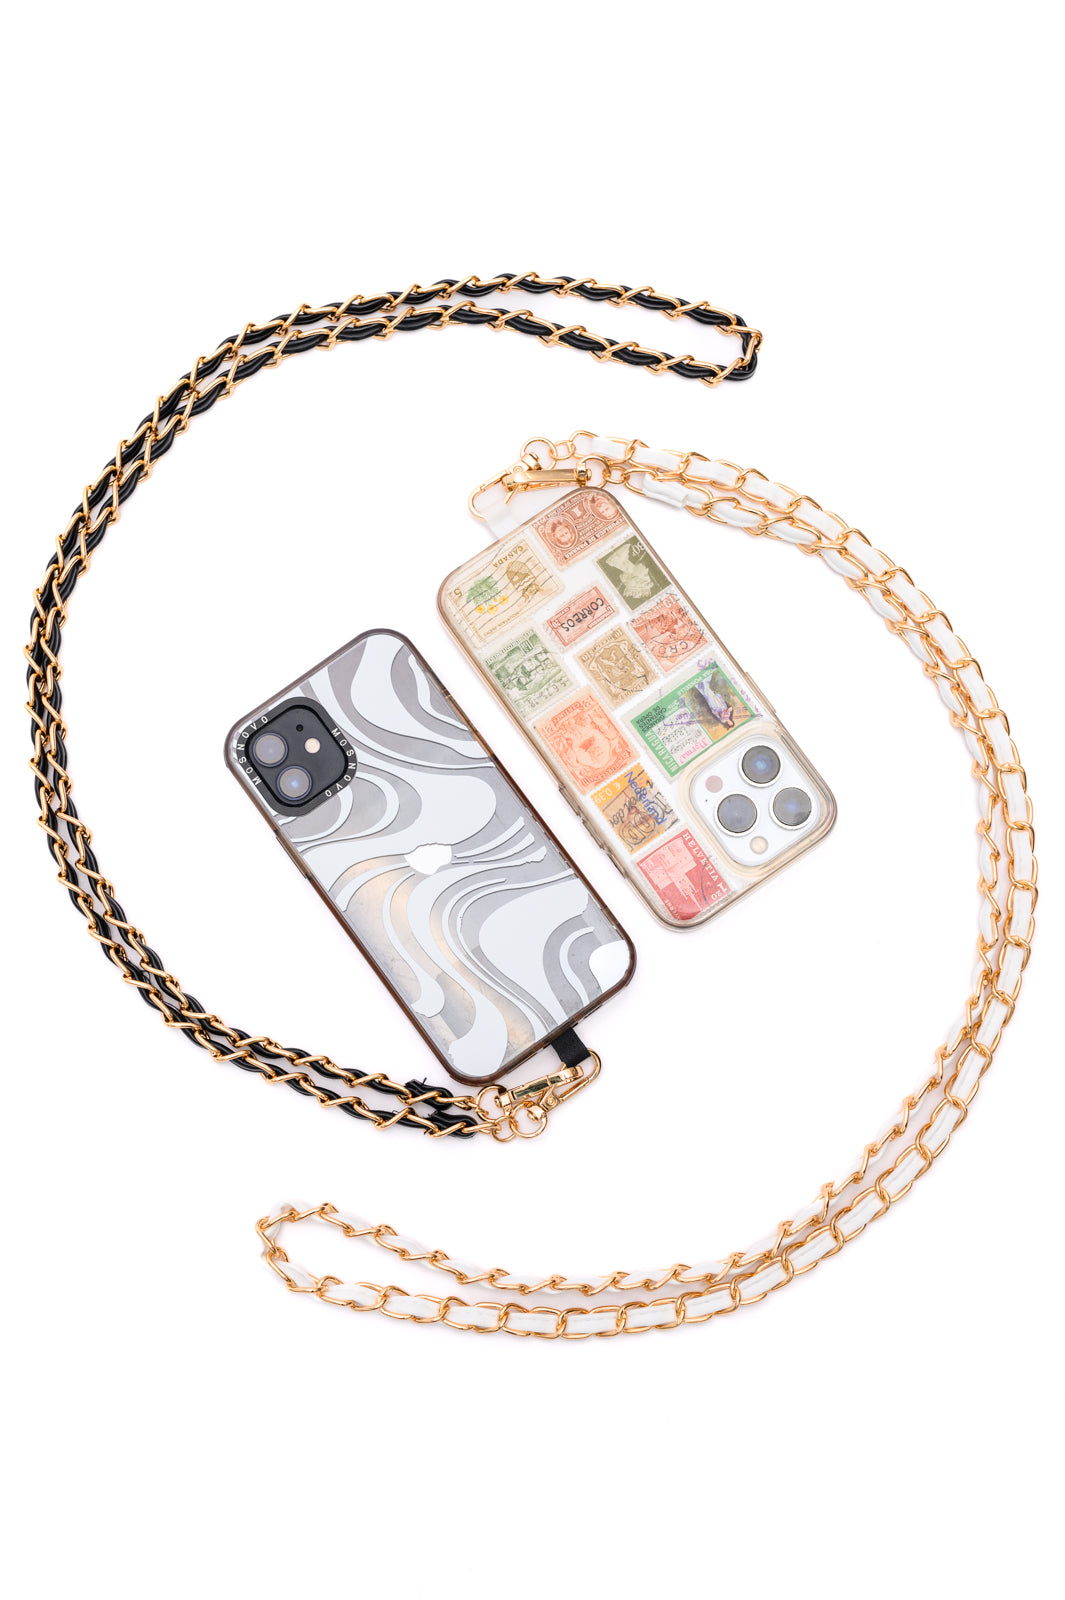 PU Leather Gold Chain Cell Phone Lanyard Set of 2  - 4/8/2024